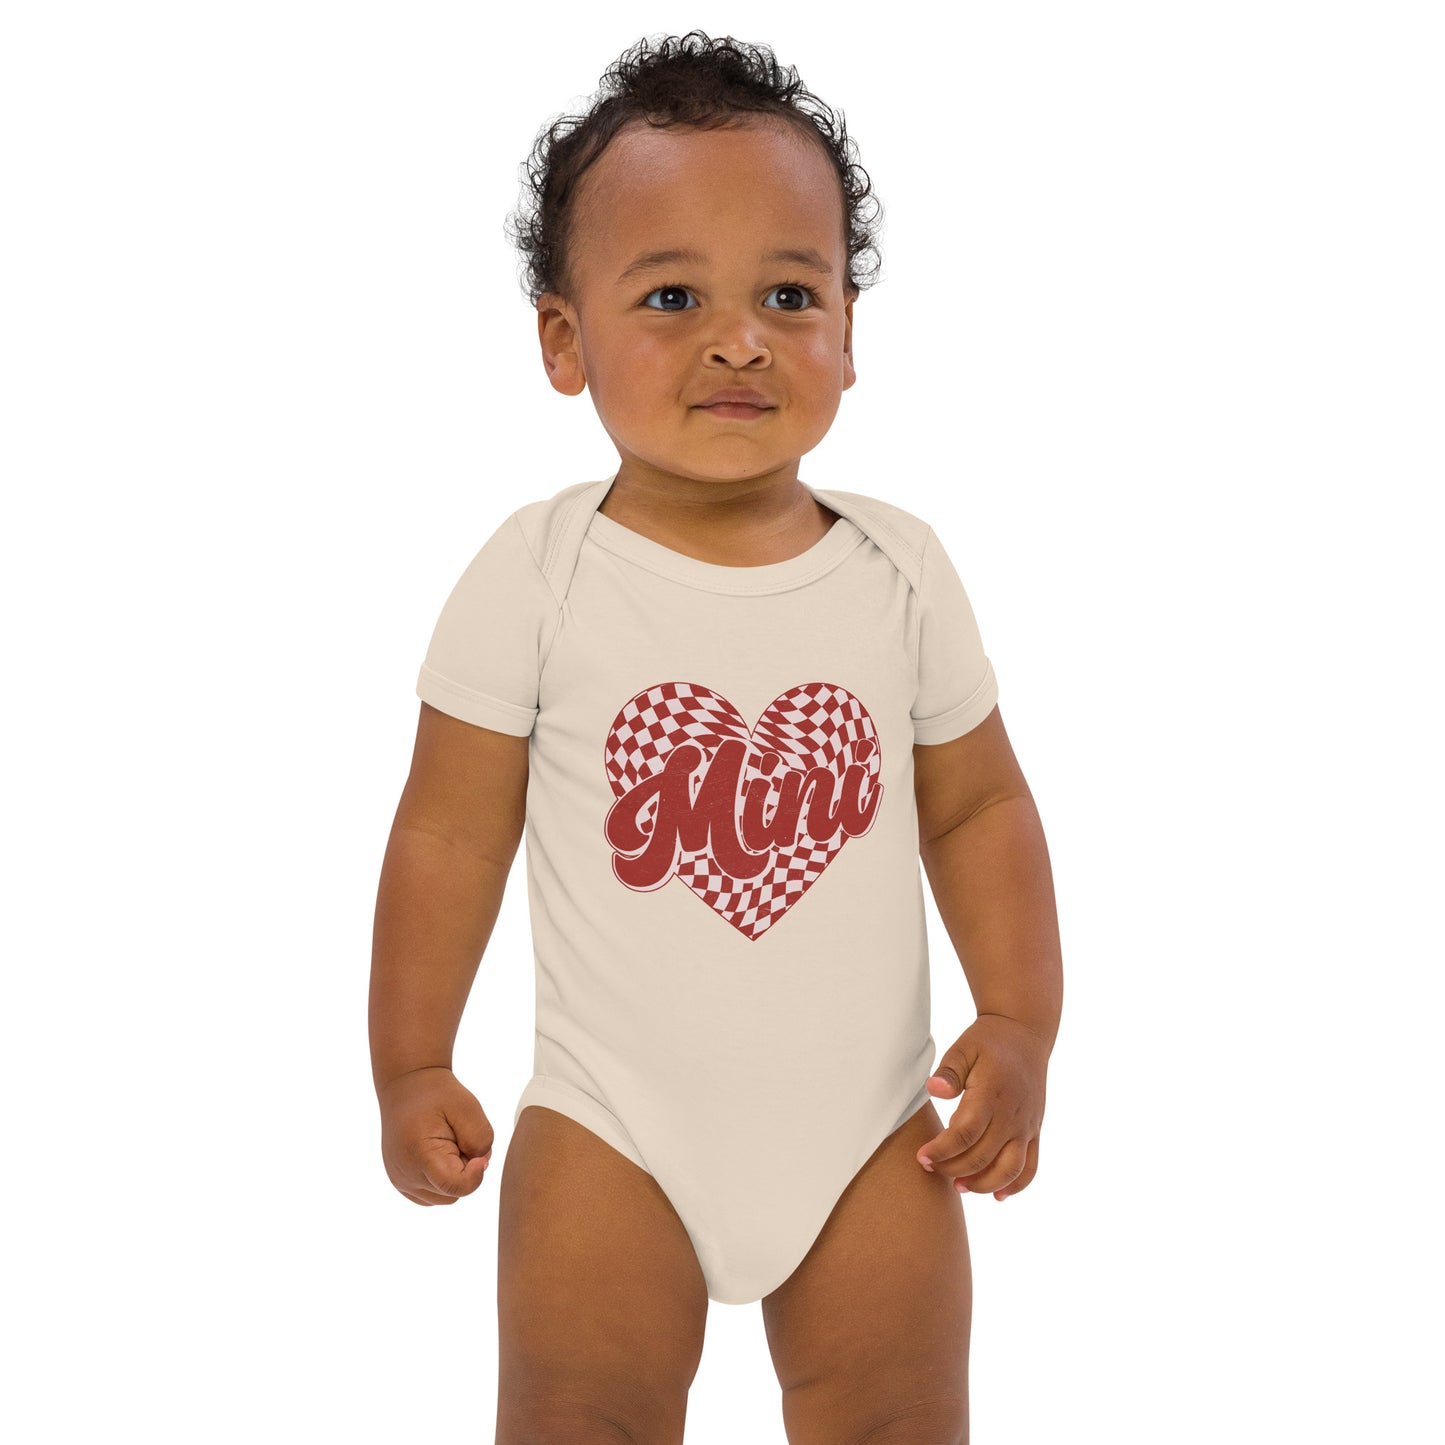 Checkered heart baby body suit